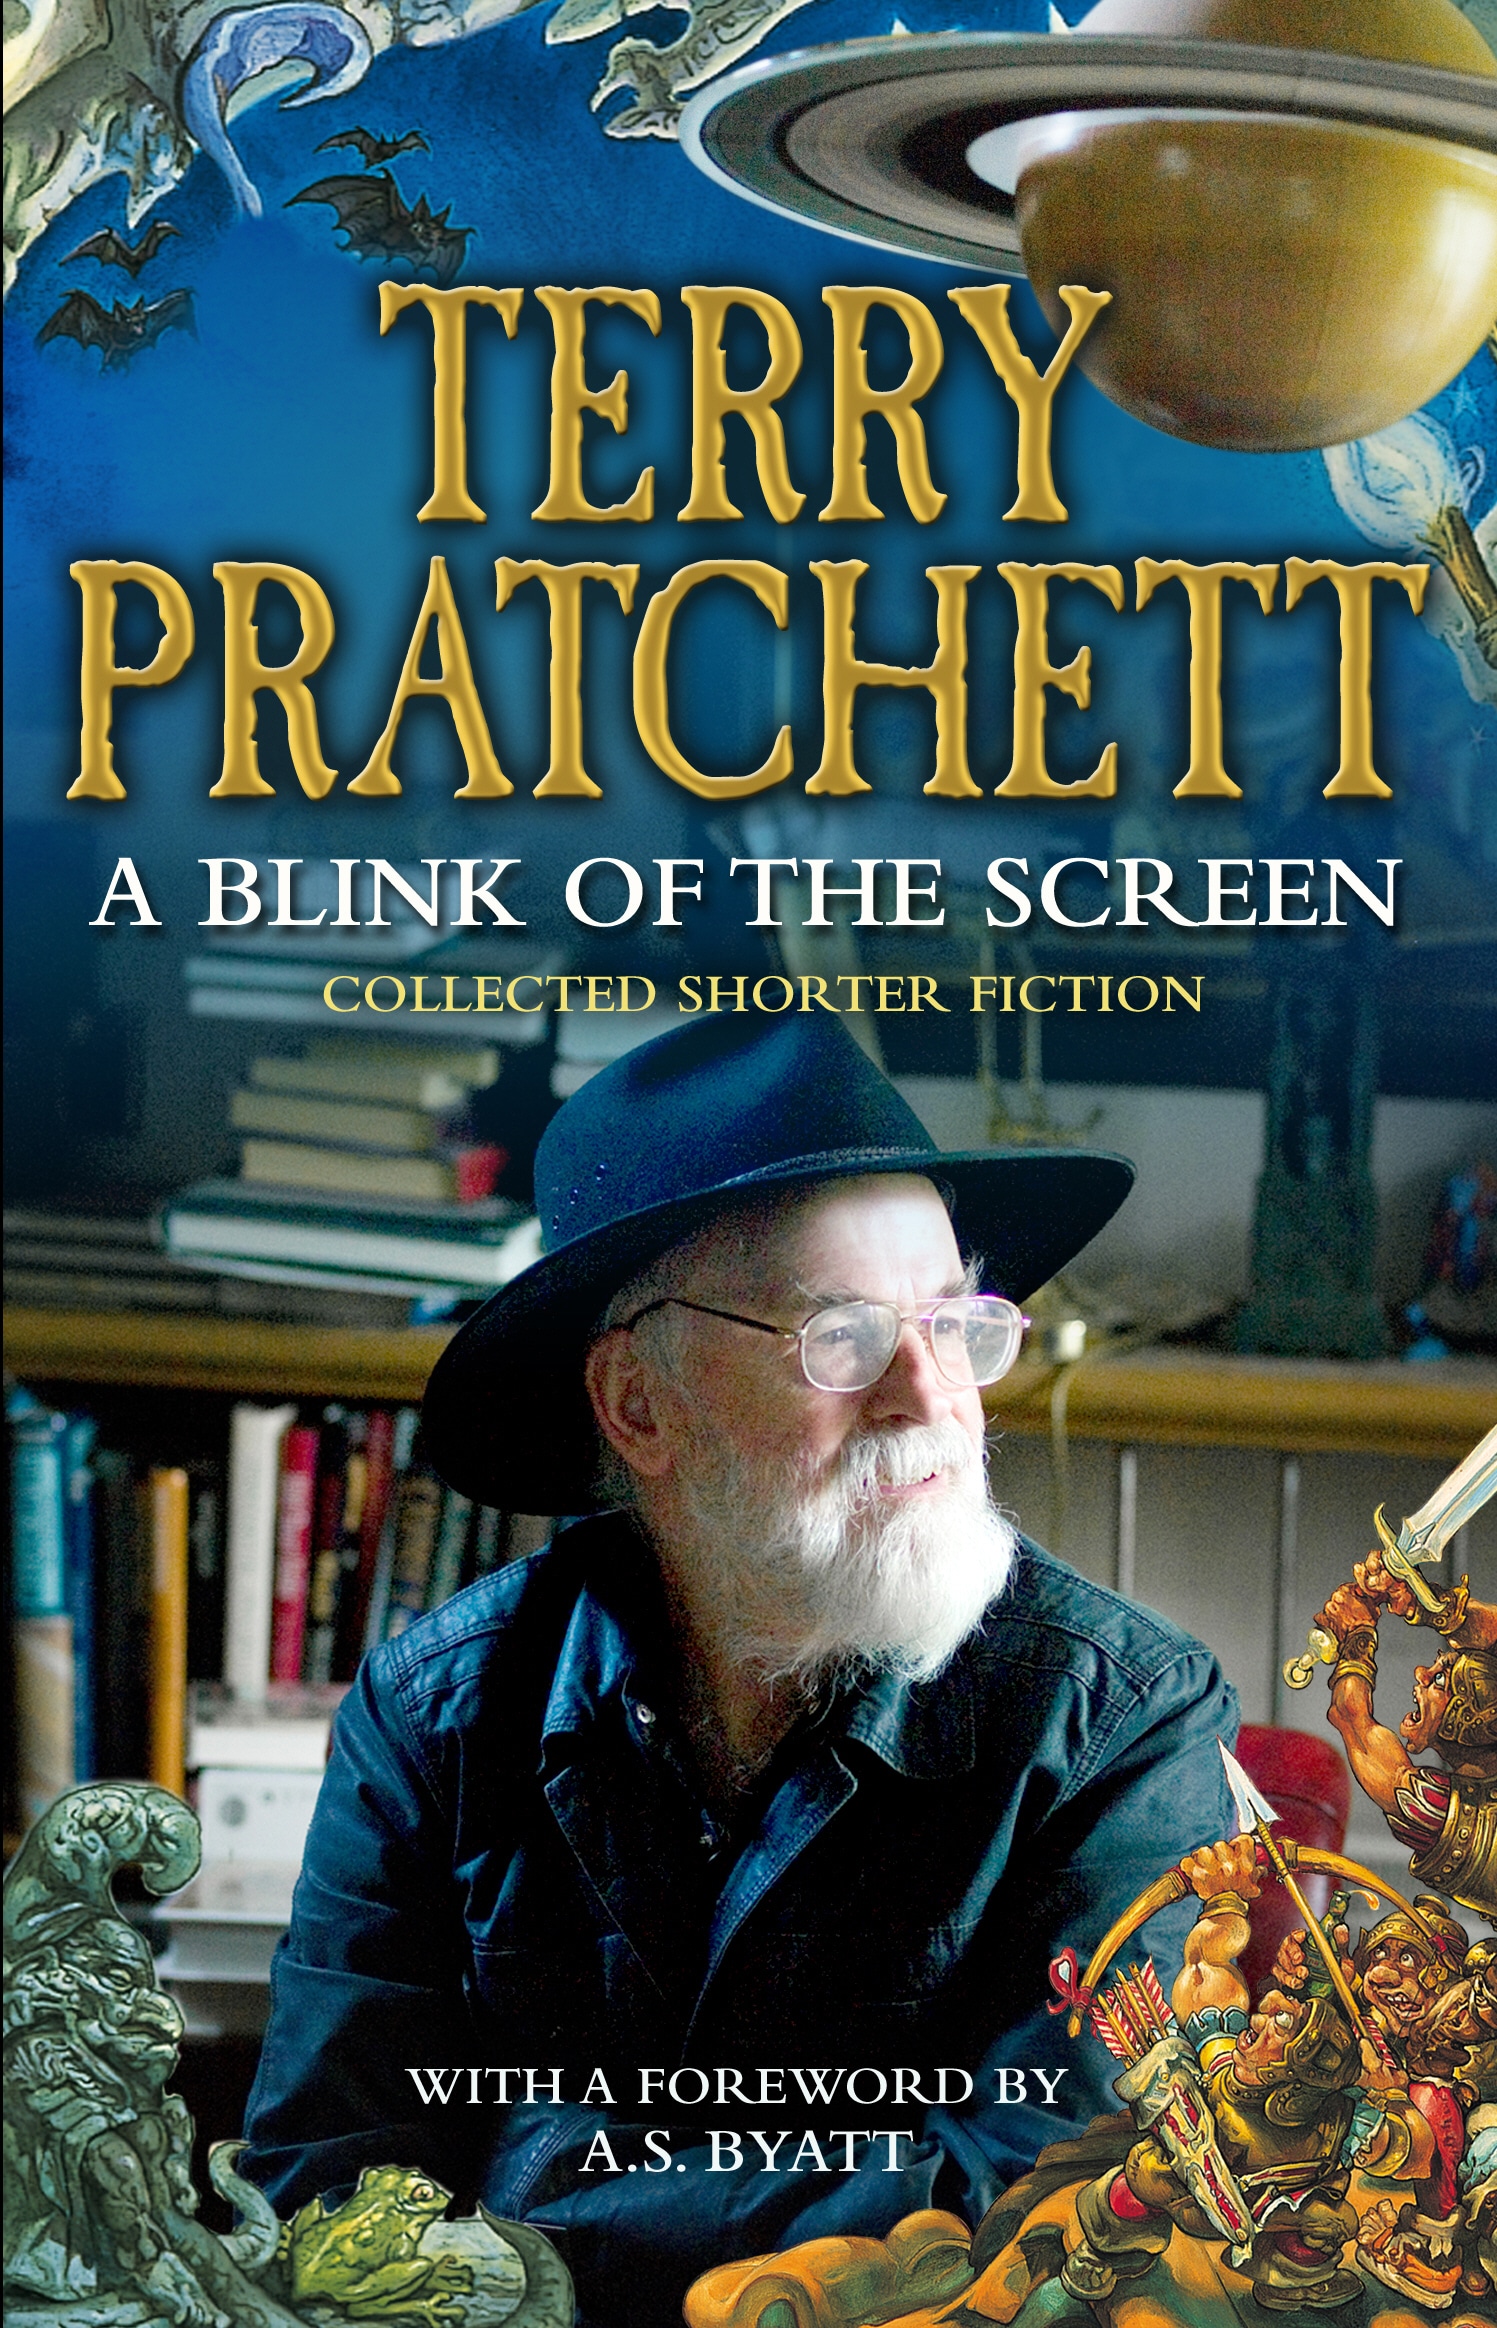 Book “A Blink of the Screen” by Terry Pratchett — October 10, 2013